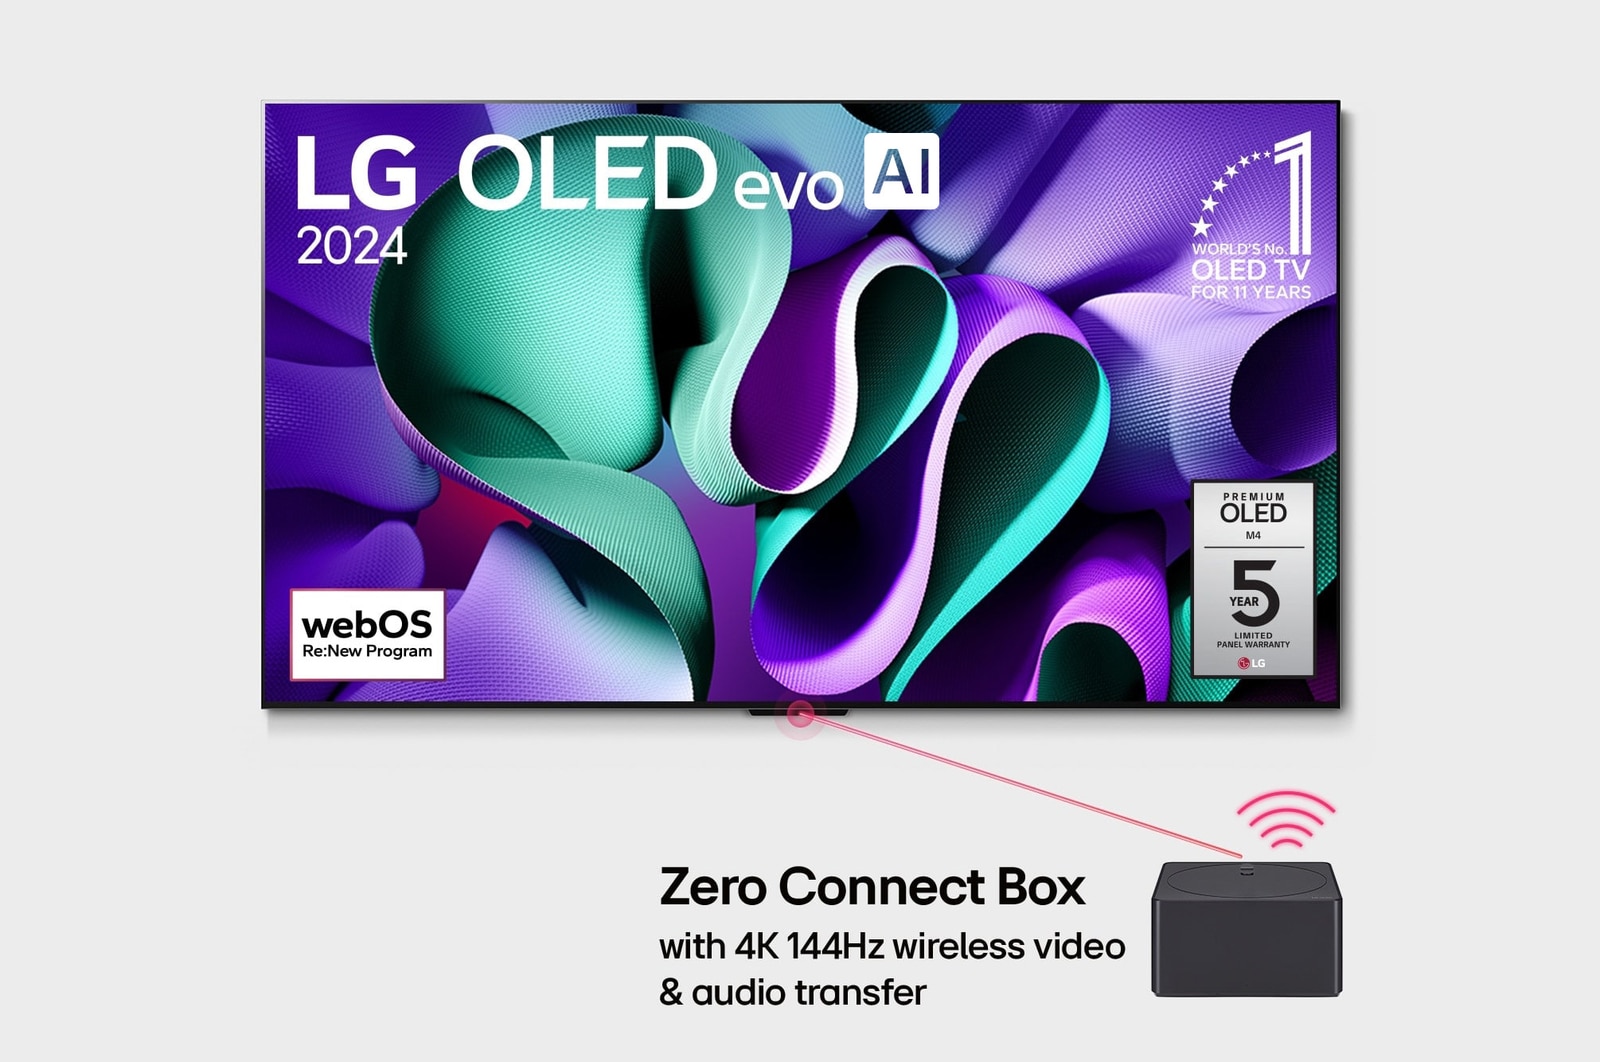 Front view with LG OLED evo AI TV, OLED M4, 11 Years of world number 1 OLED Emblem, webOS Re:New Program logo, 5-Year Panel Warranty logo on screen, and a Zero Connect Box with 4K 144Hz wireless video & audio transfer connected to a TV, and a Wi-Fi signal coming out of the box